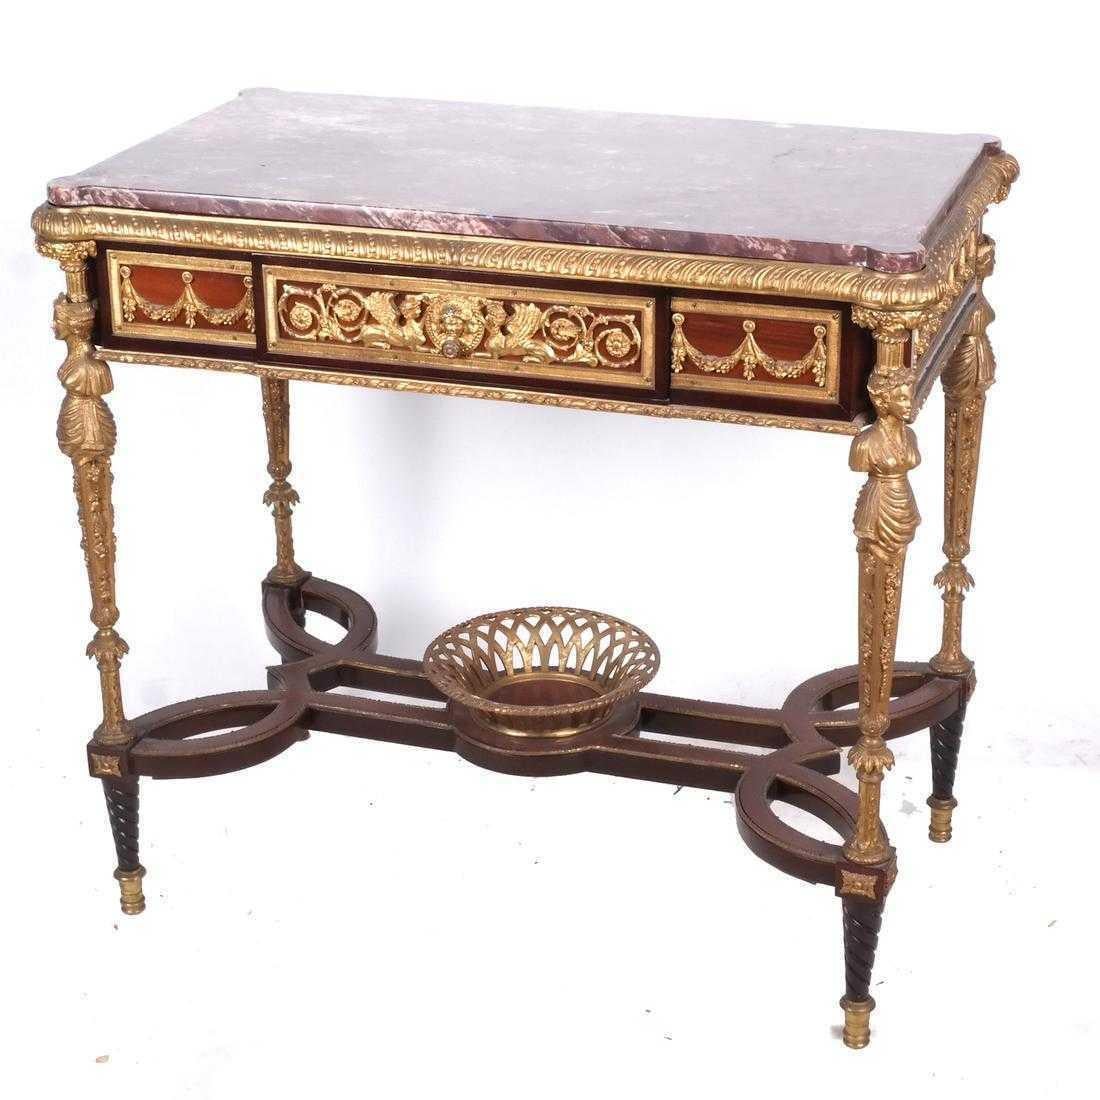 Louis XVI style bronze center table desk in the manner of Adam Weisweiler with marble,
early 20th century

Having a rectangular red marble top in a bronze frame, above a wide apron having a single drawer centered by bronze mounts depicting a mask